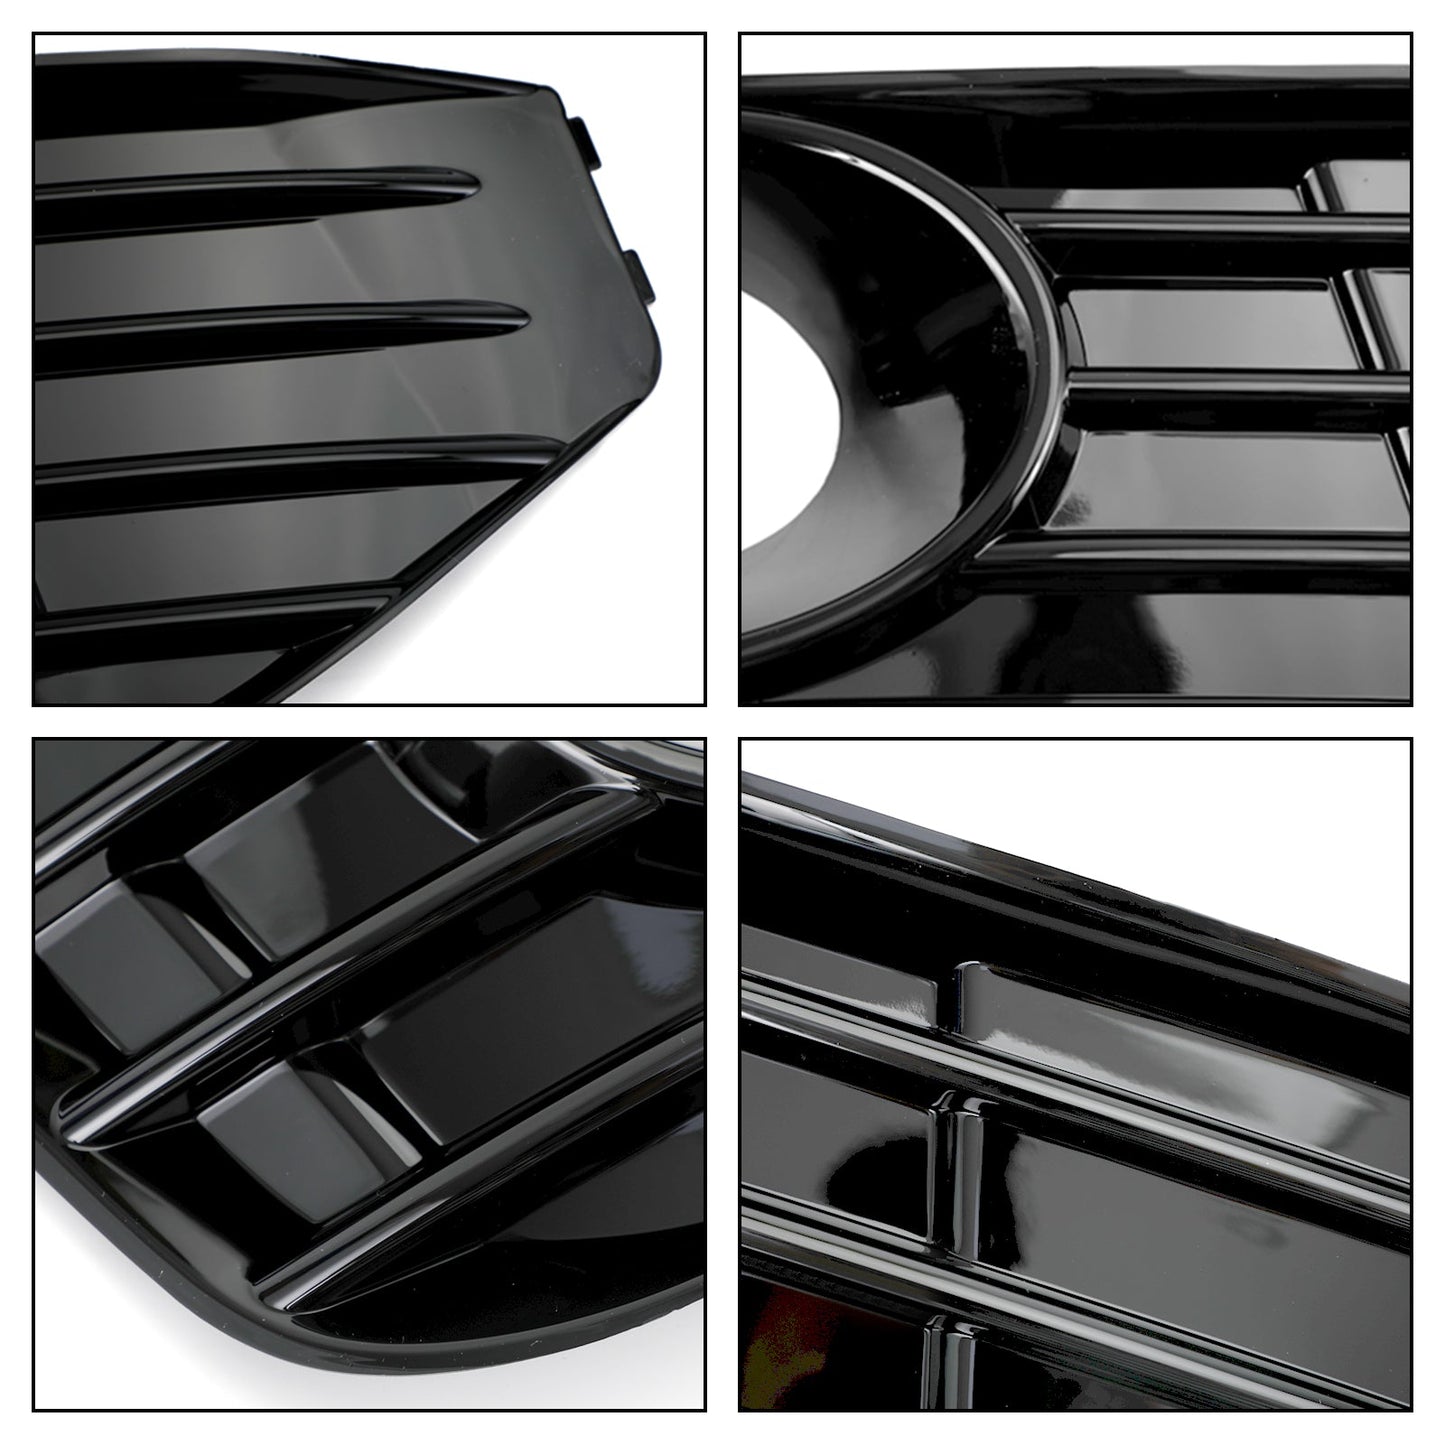 VW T5 T5.1 2010-2015 Gloss Black Fog Lamp Light Cover Insert S-line GrilleVehicle Parts &amp; Accessories, Car Parts, Interior Parts &amp; Furnishings!